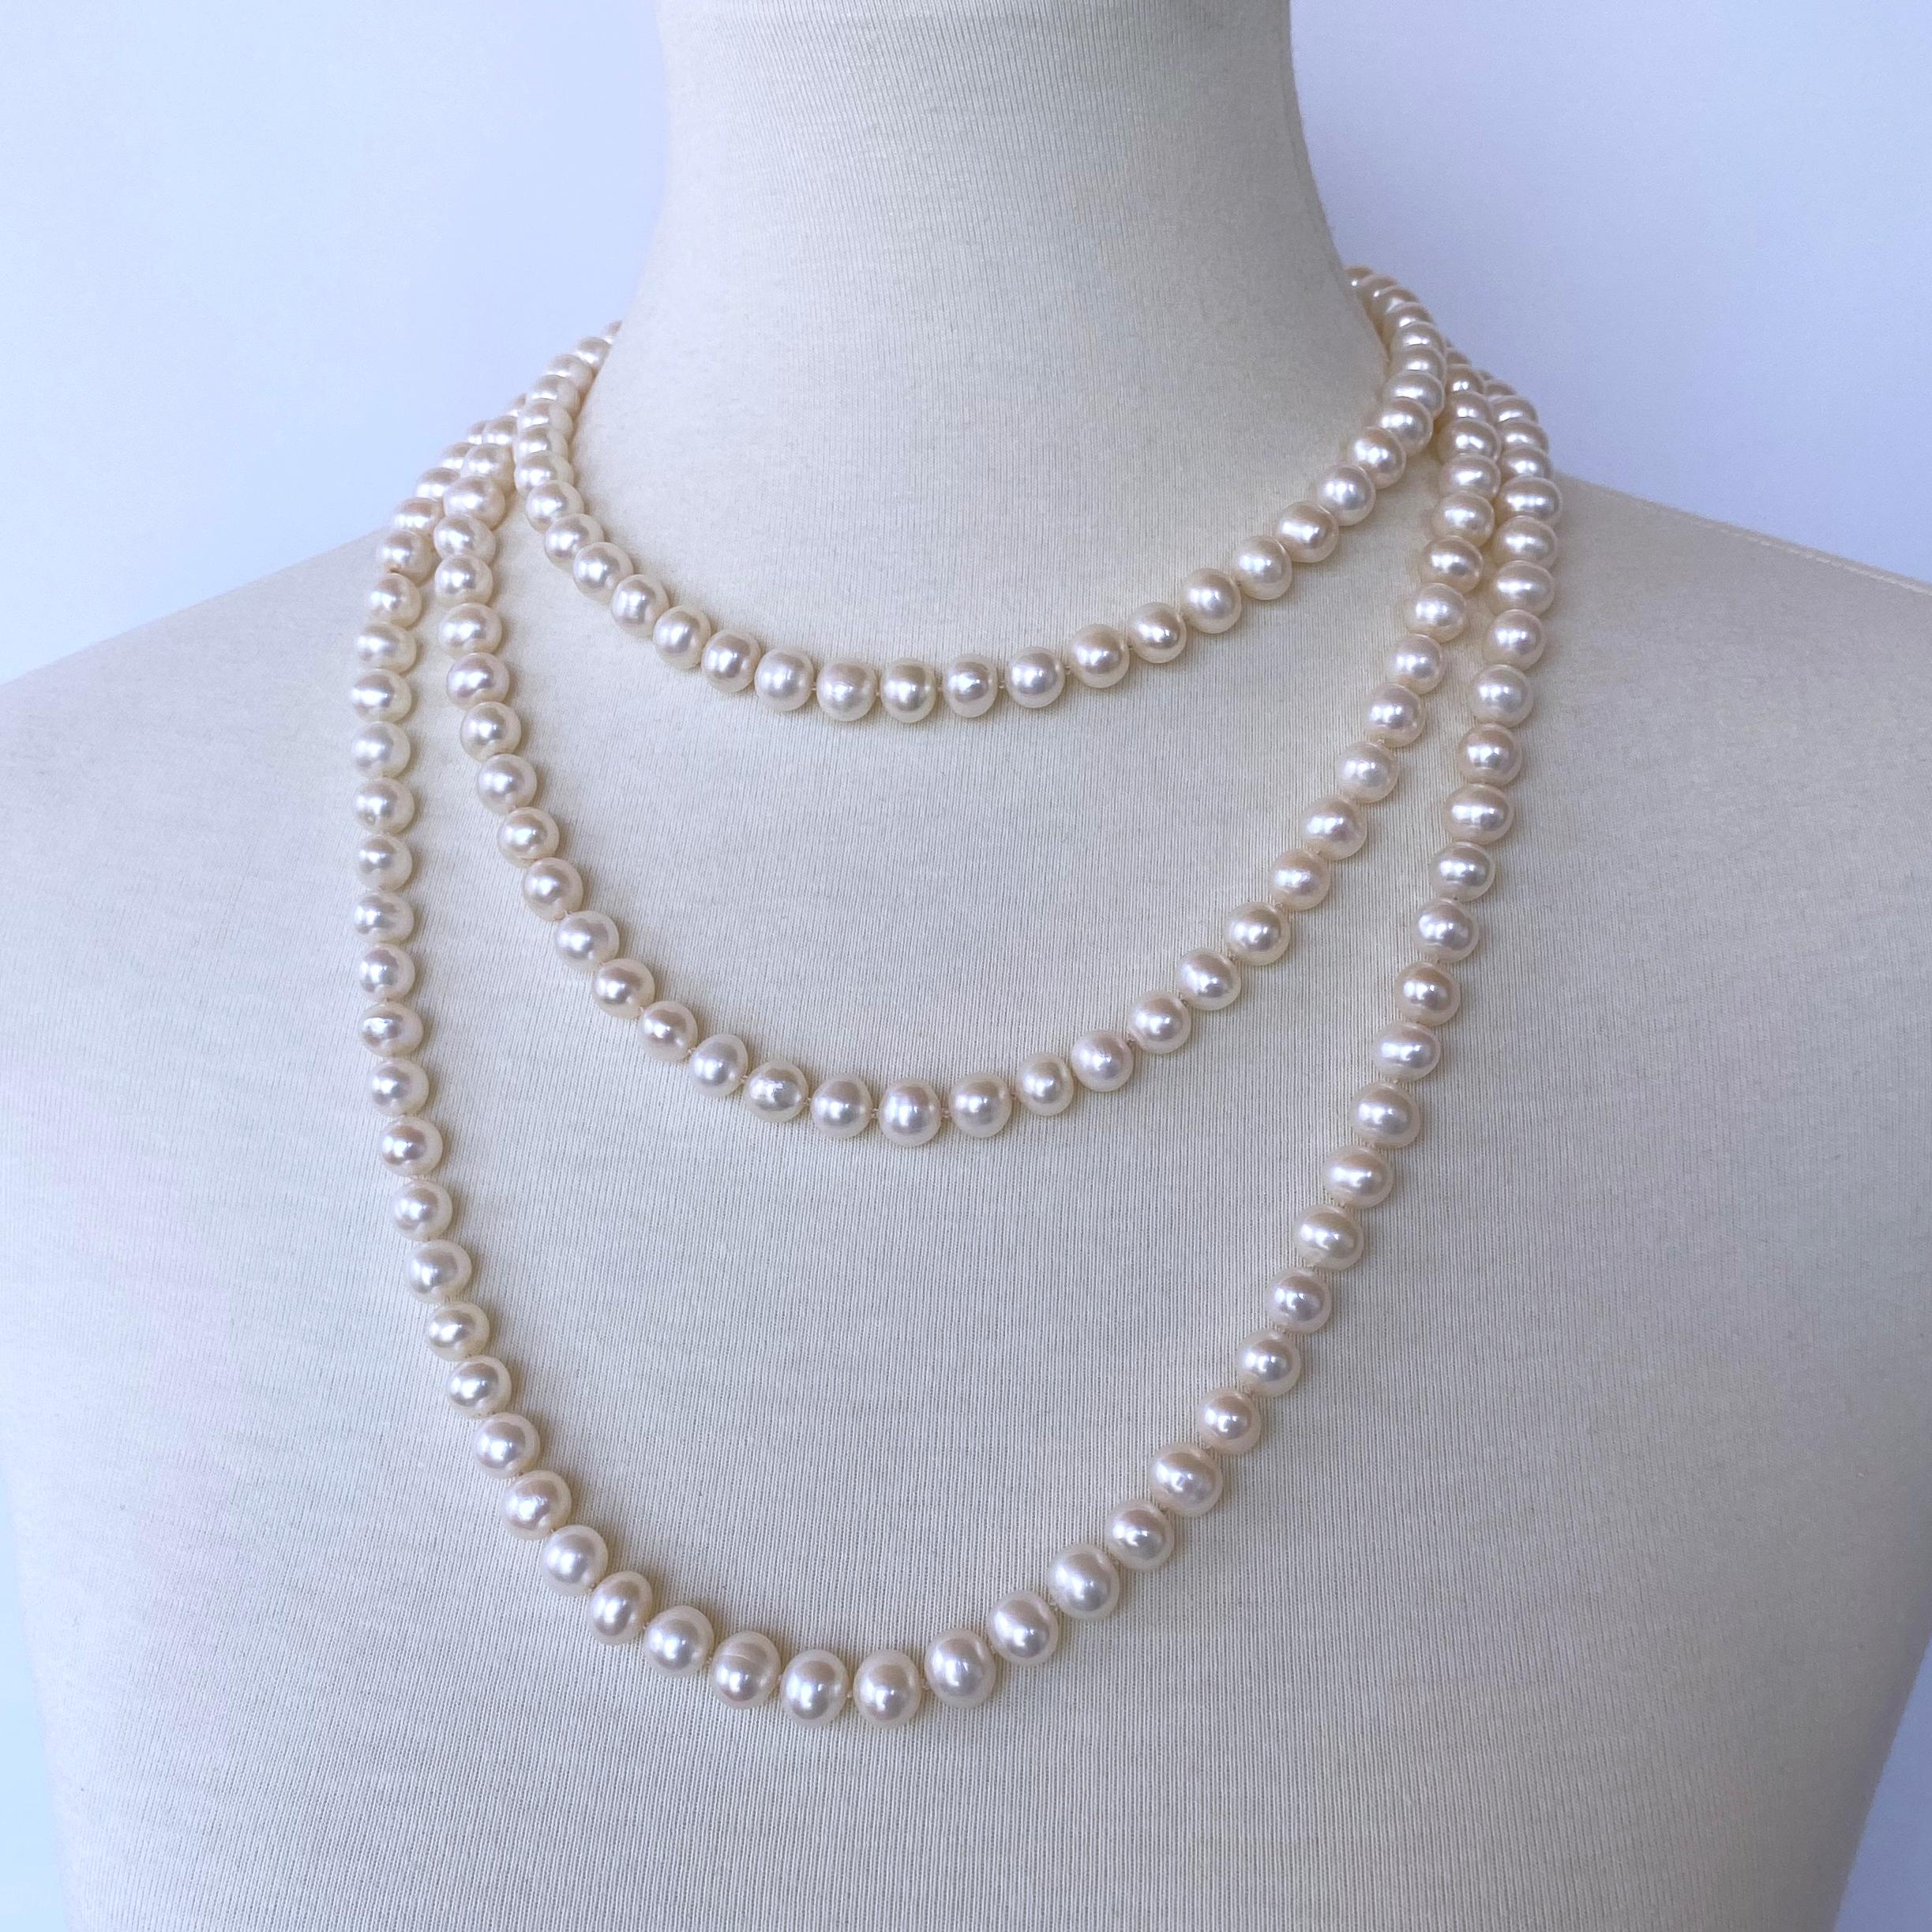 Gorgeous long knotted Pearl necklace by Marina J. This beautiful piece features all Cultured White, which display great sheen and iridescence. Measuring 60 inches long, this necklace meets at a solid 14k Yellow Gold Ball clasp, which perfectly